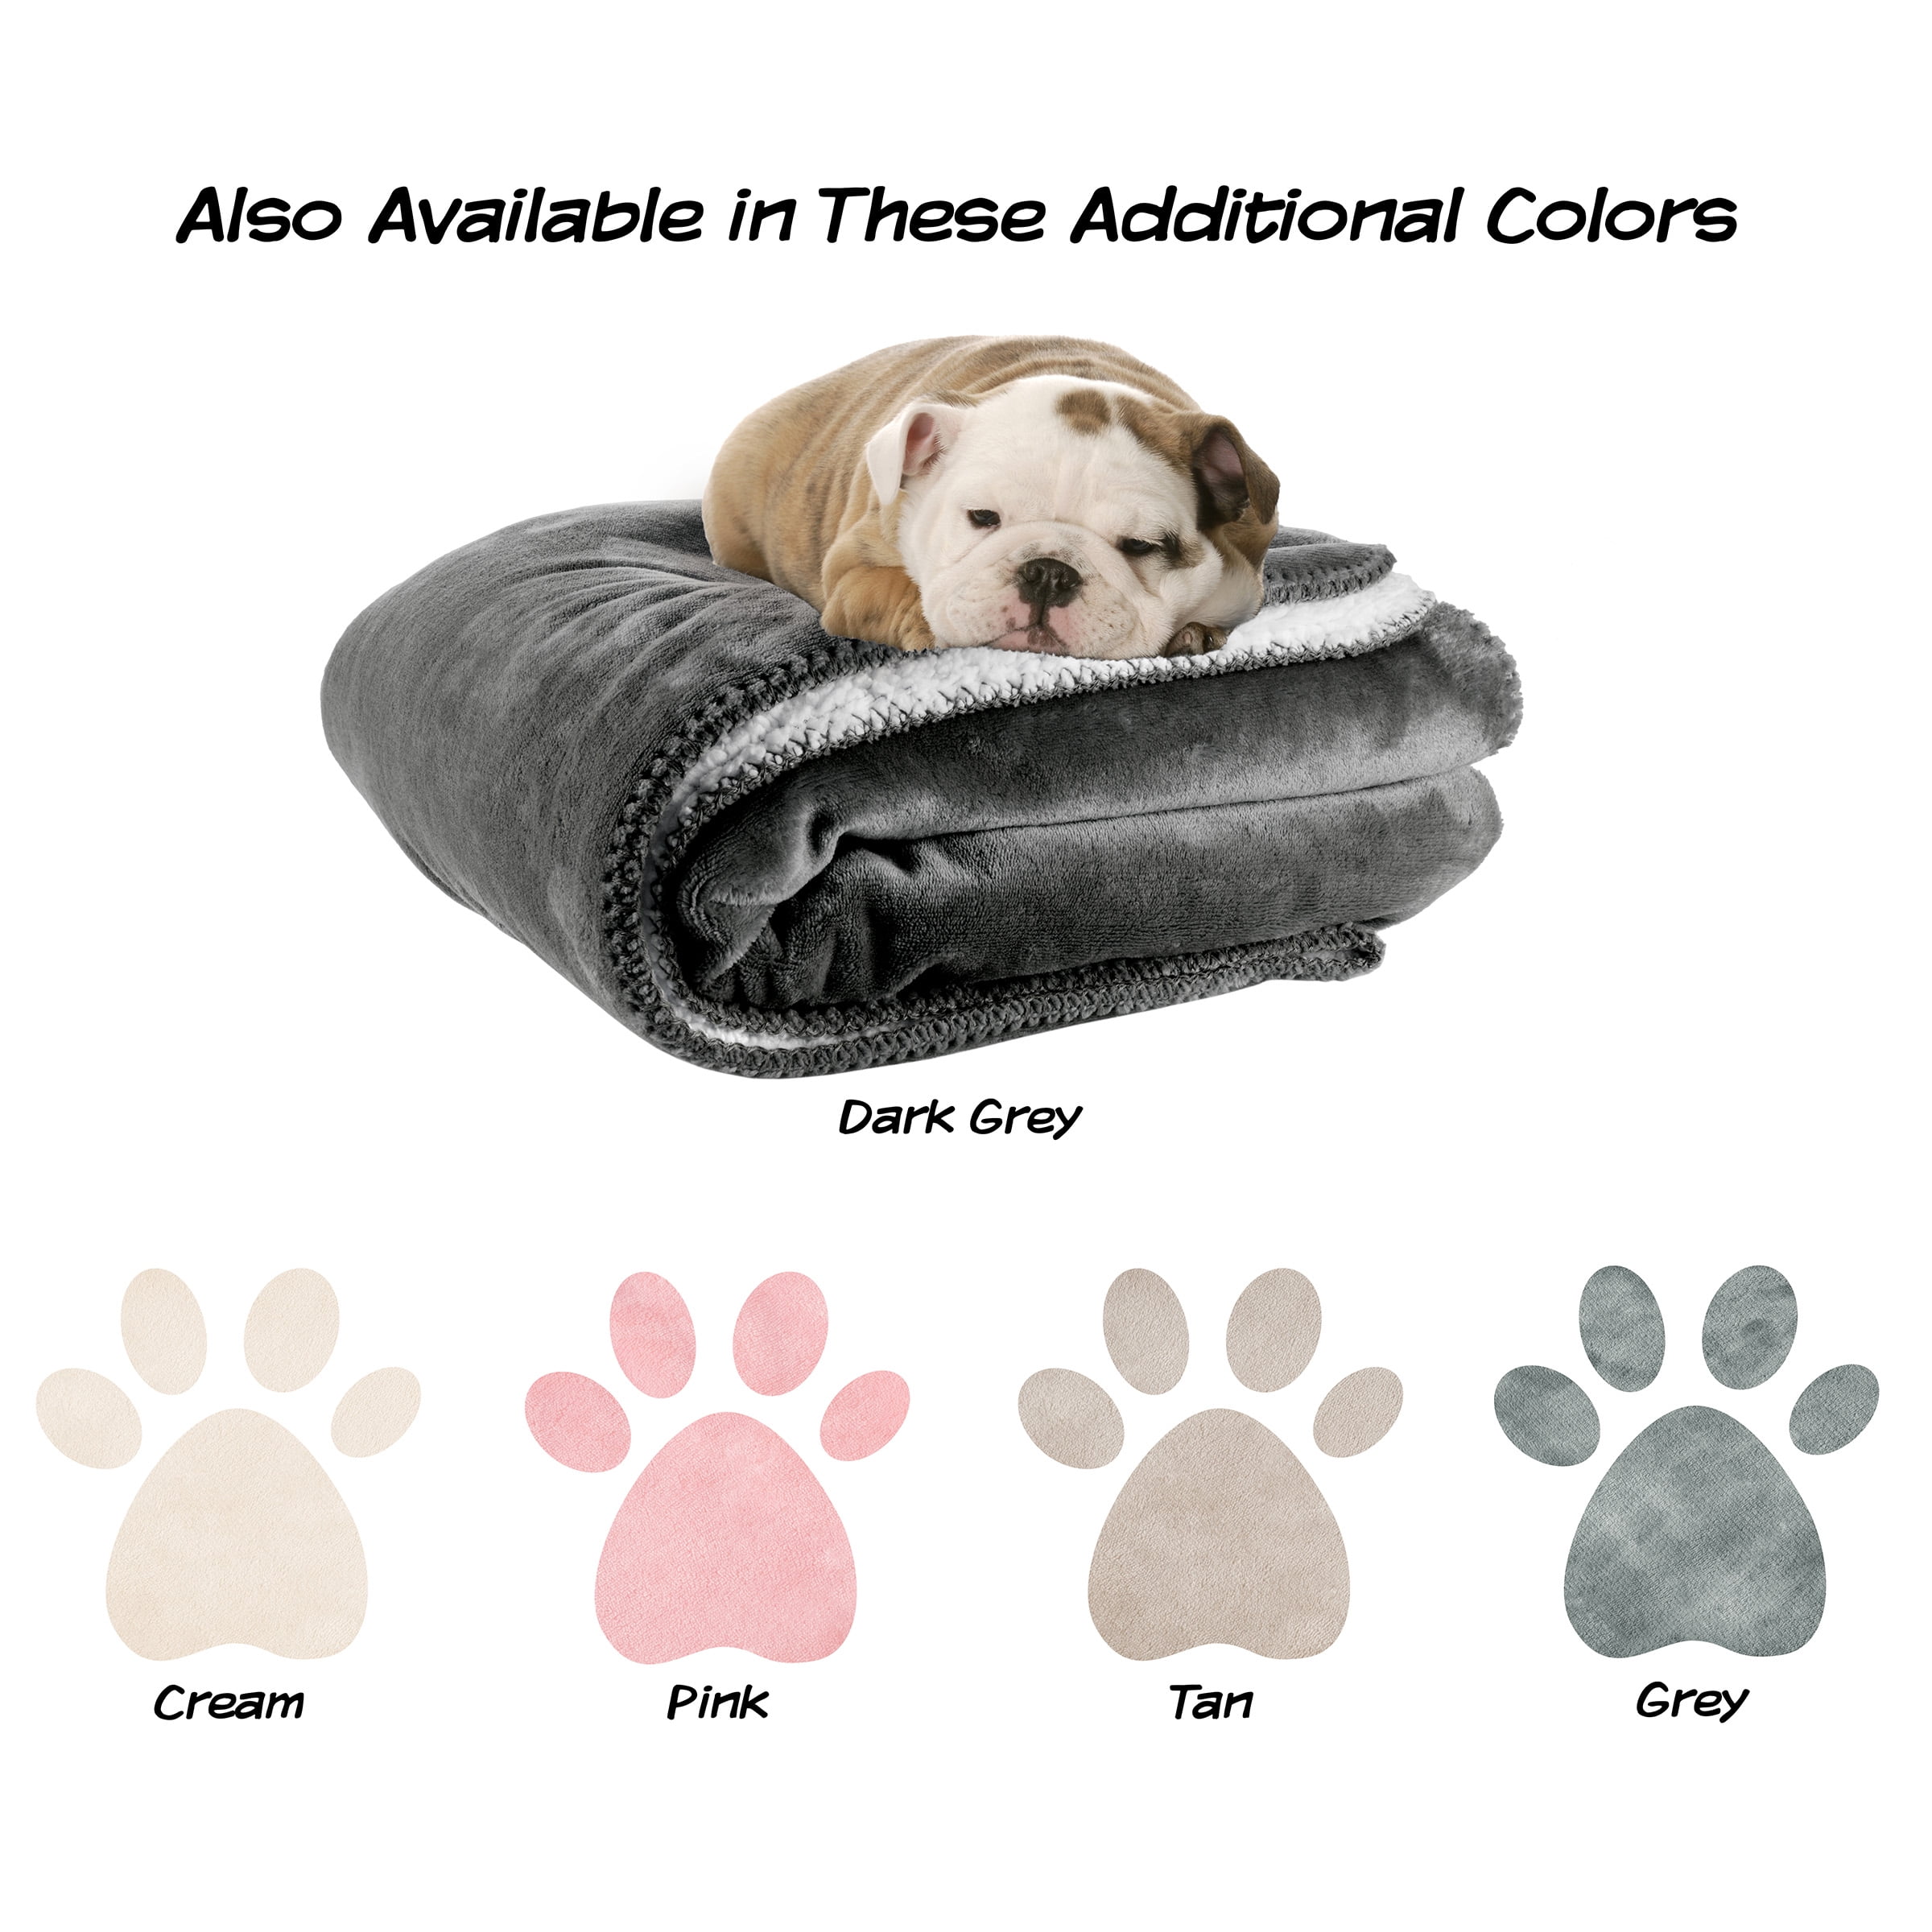 Chairs or Pet Fur-Machine Washable Car PETMAKER Waterproof Pet Blankets Soft Plush Throw Protects Couch Stains or Bed from Spills 